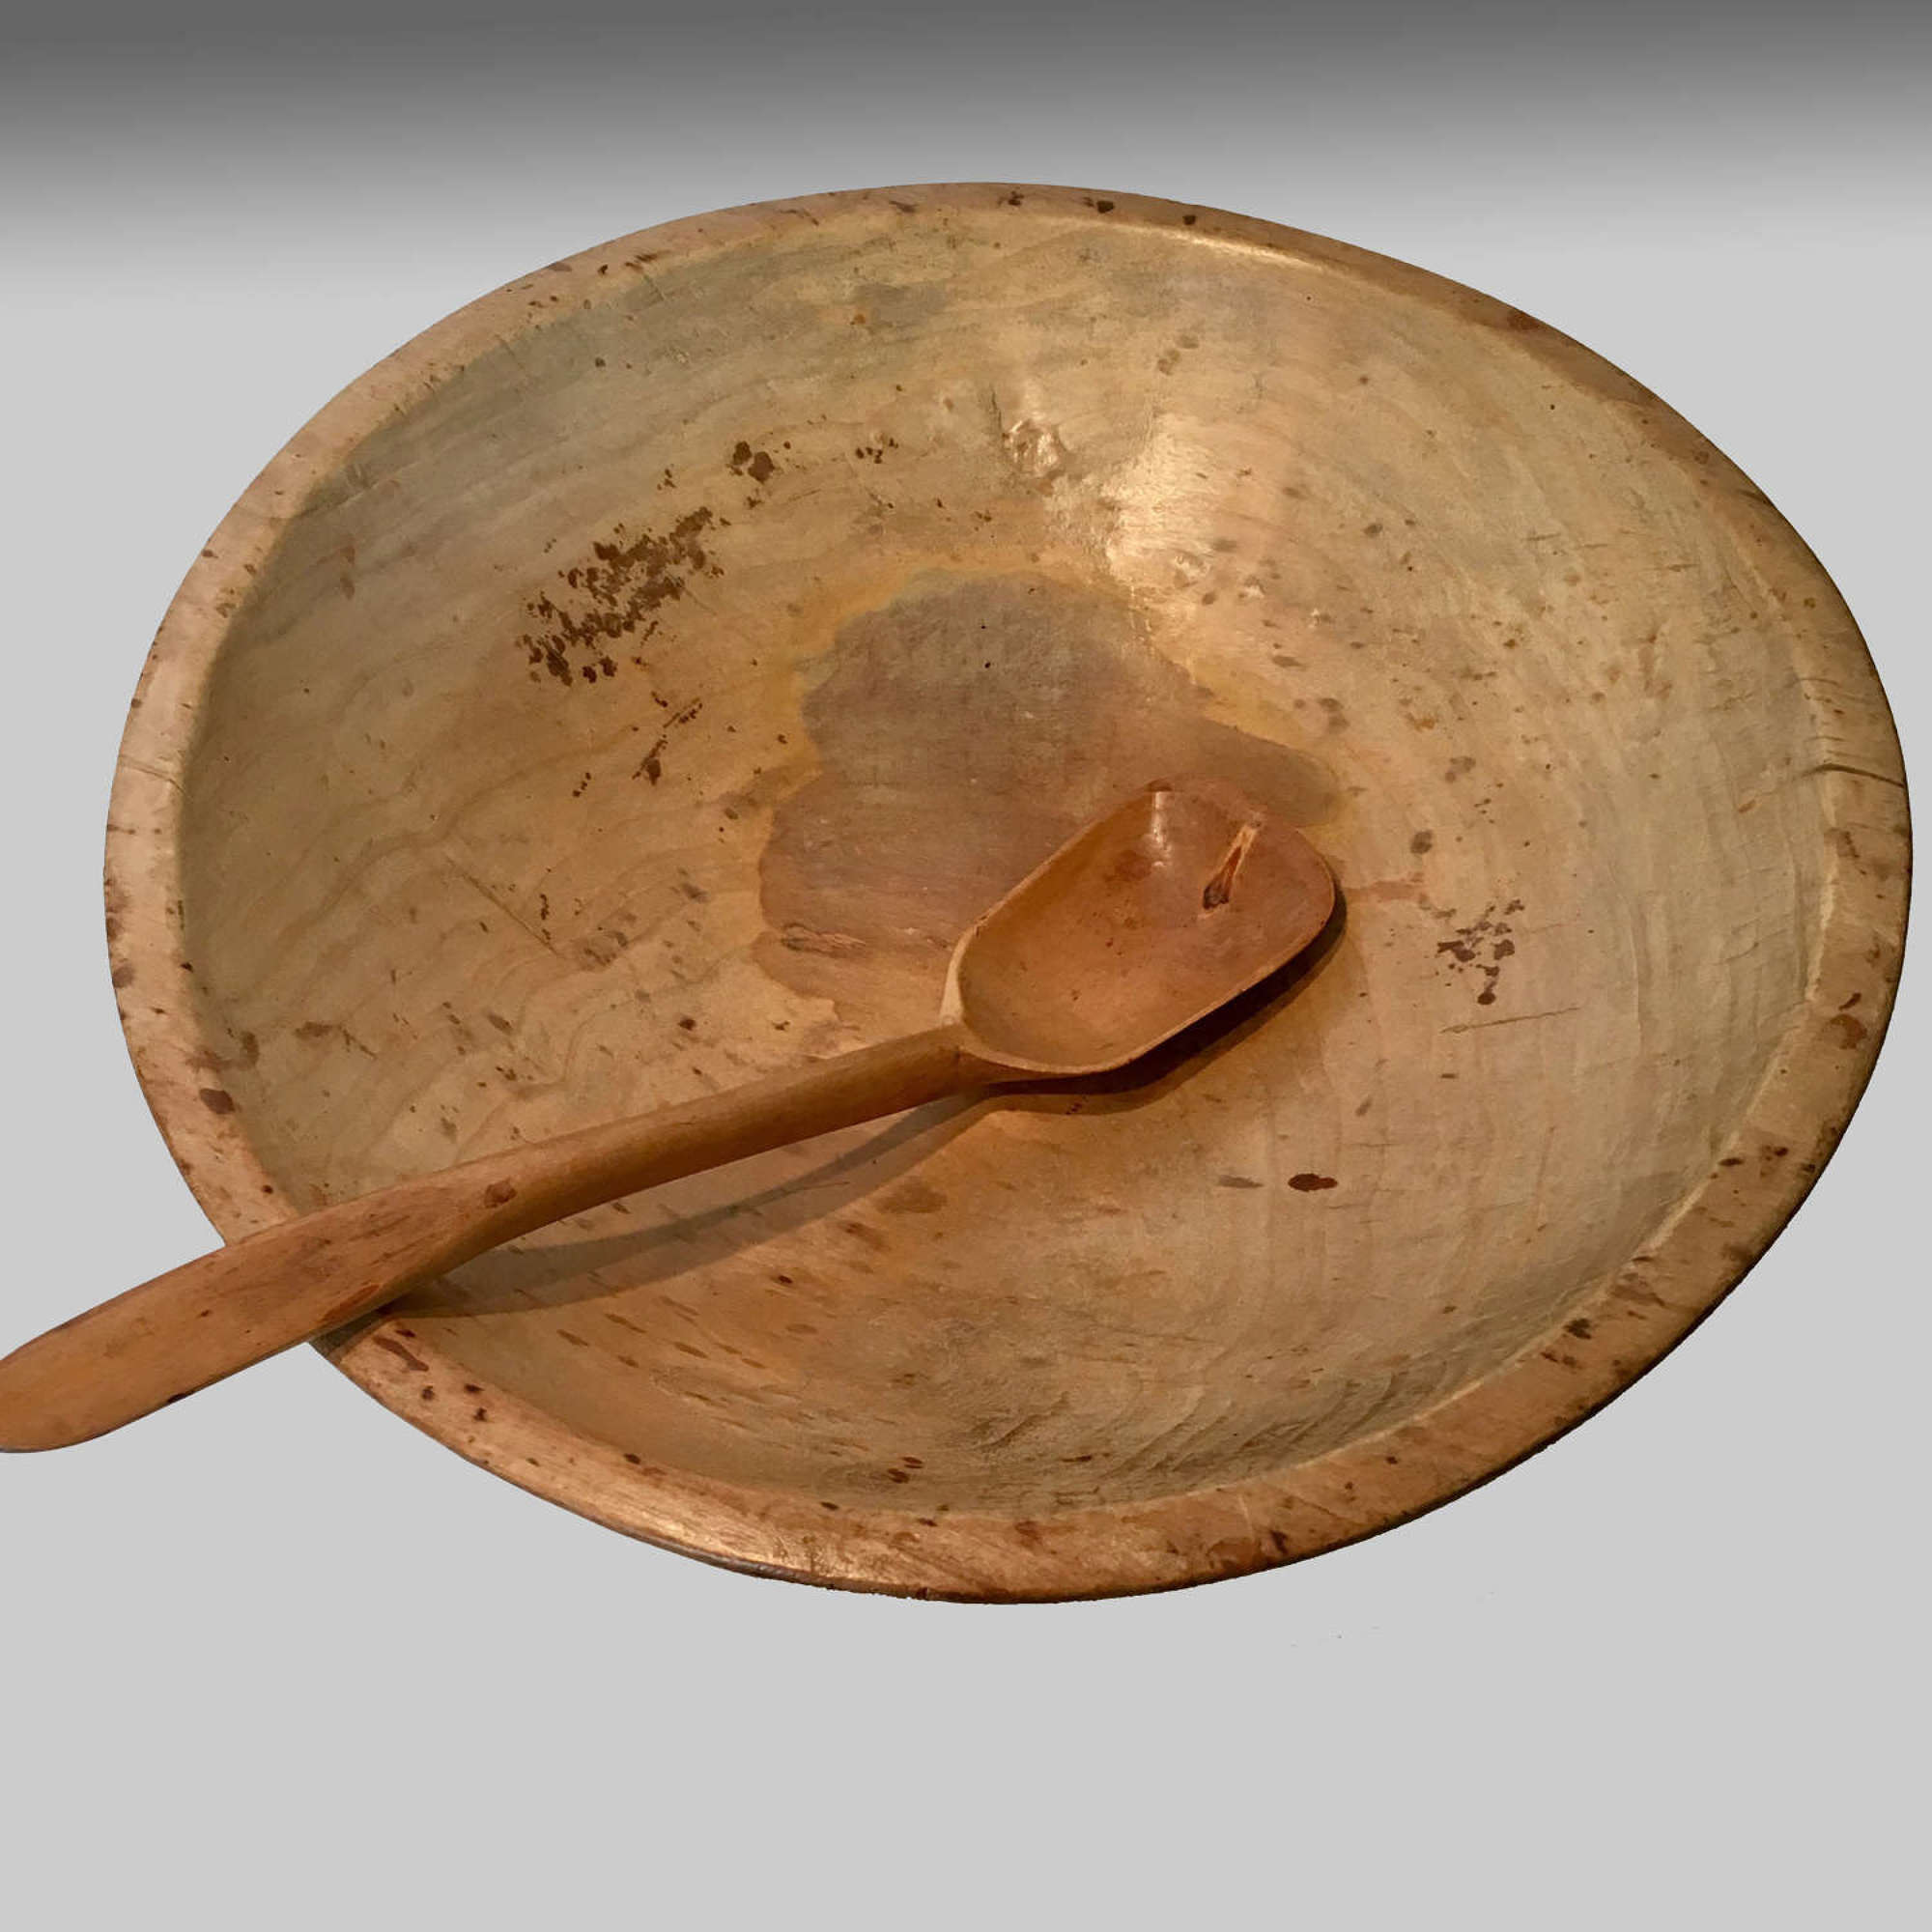 Antique sycamore dairy bowl and spoon